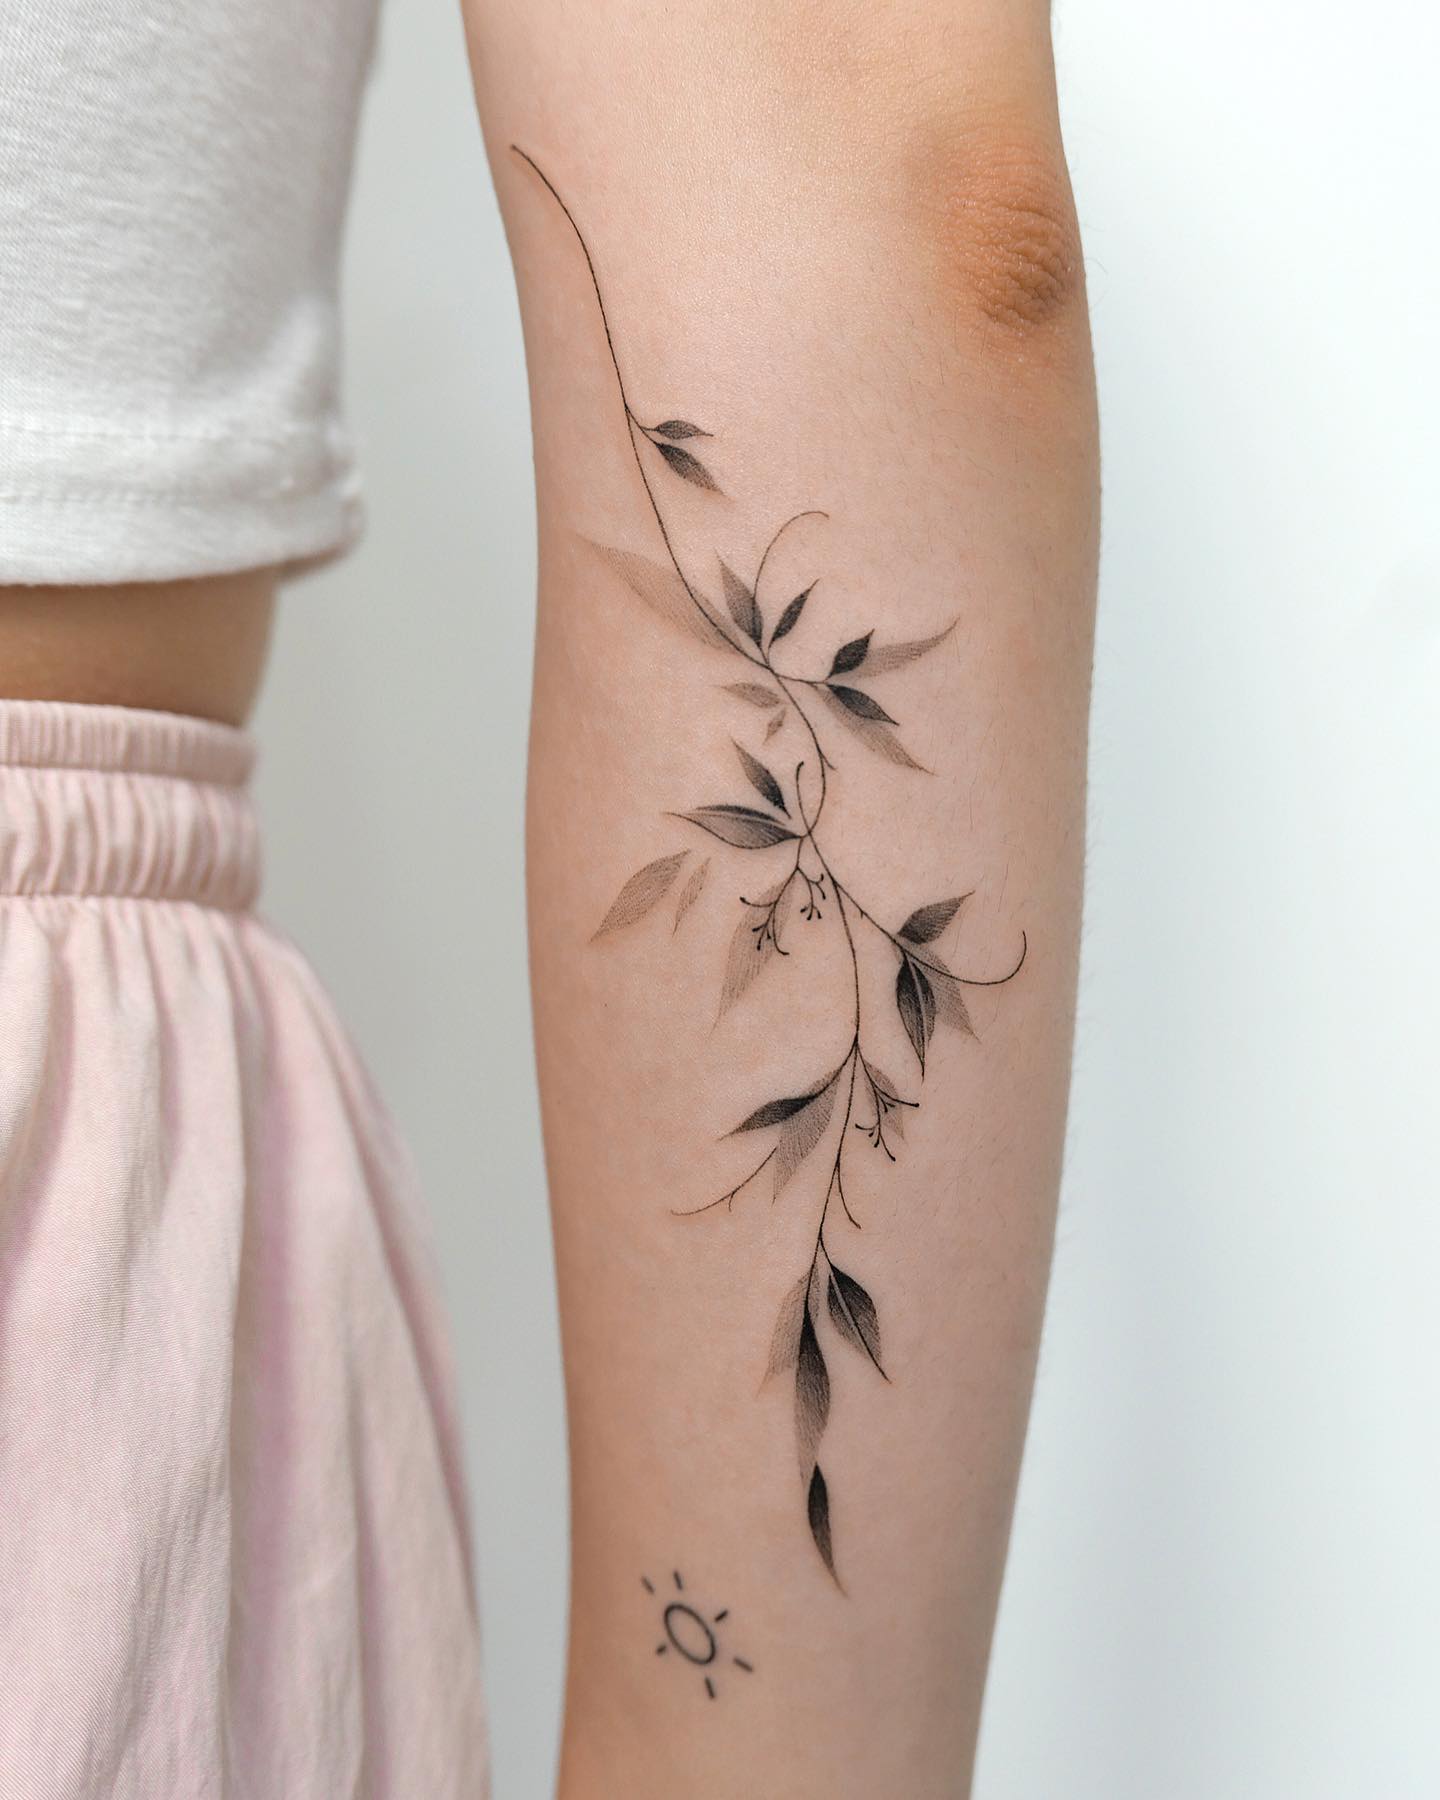 55 Lovely Leaf Tattoo Designs to Try with Meaning